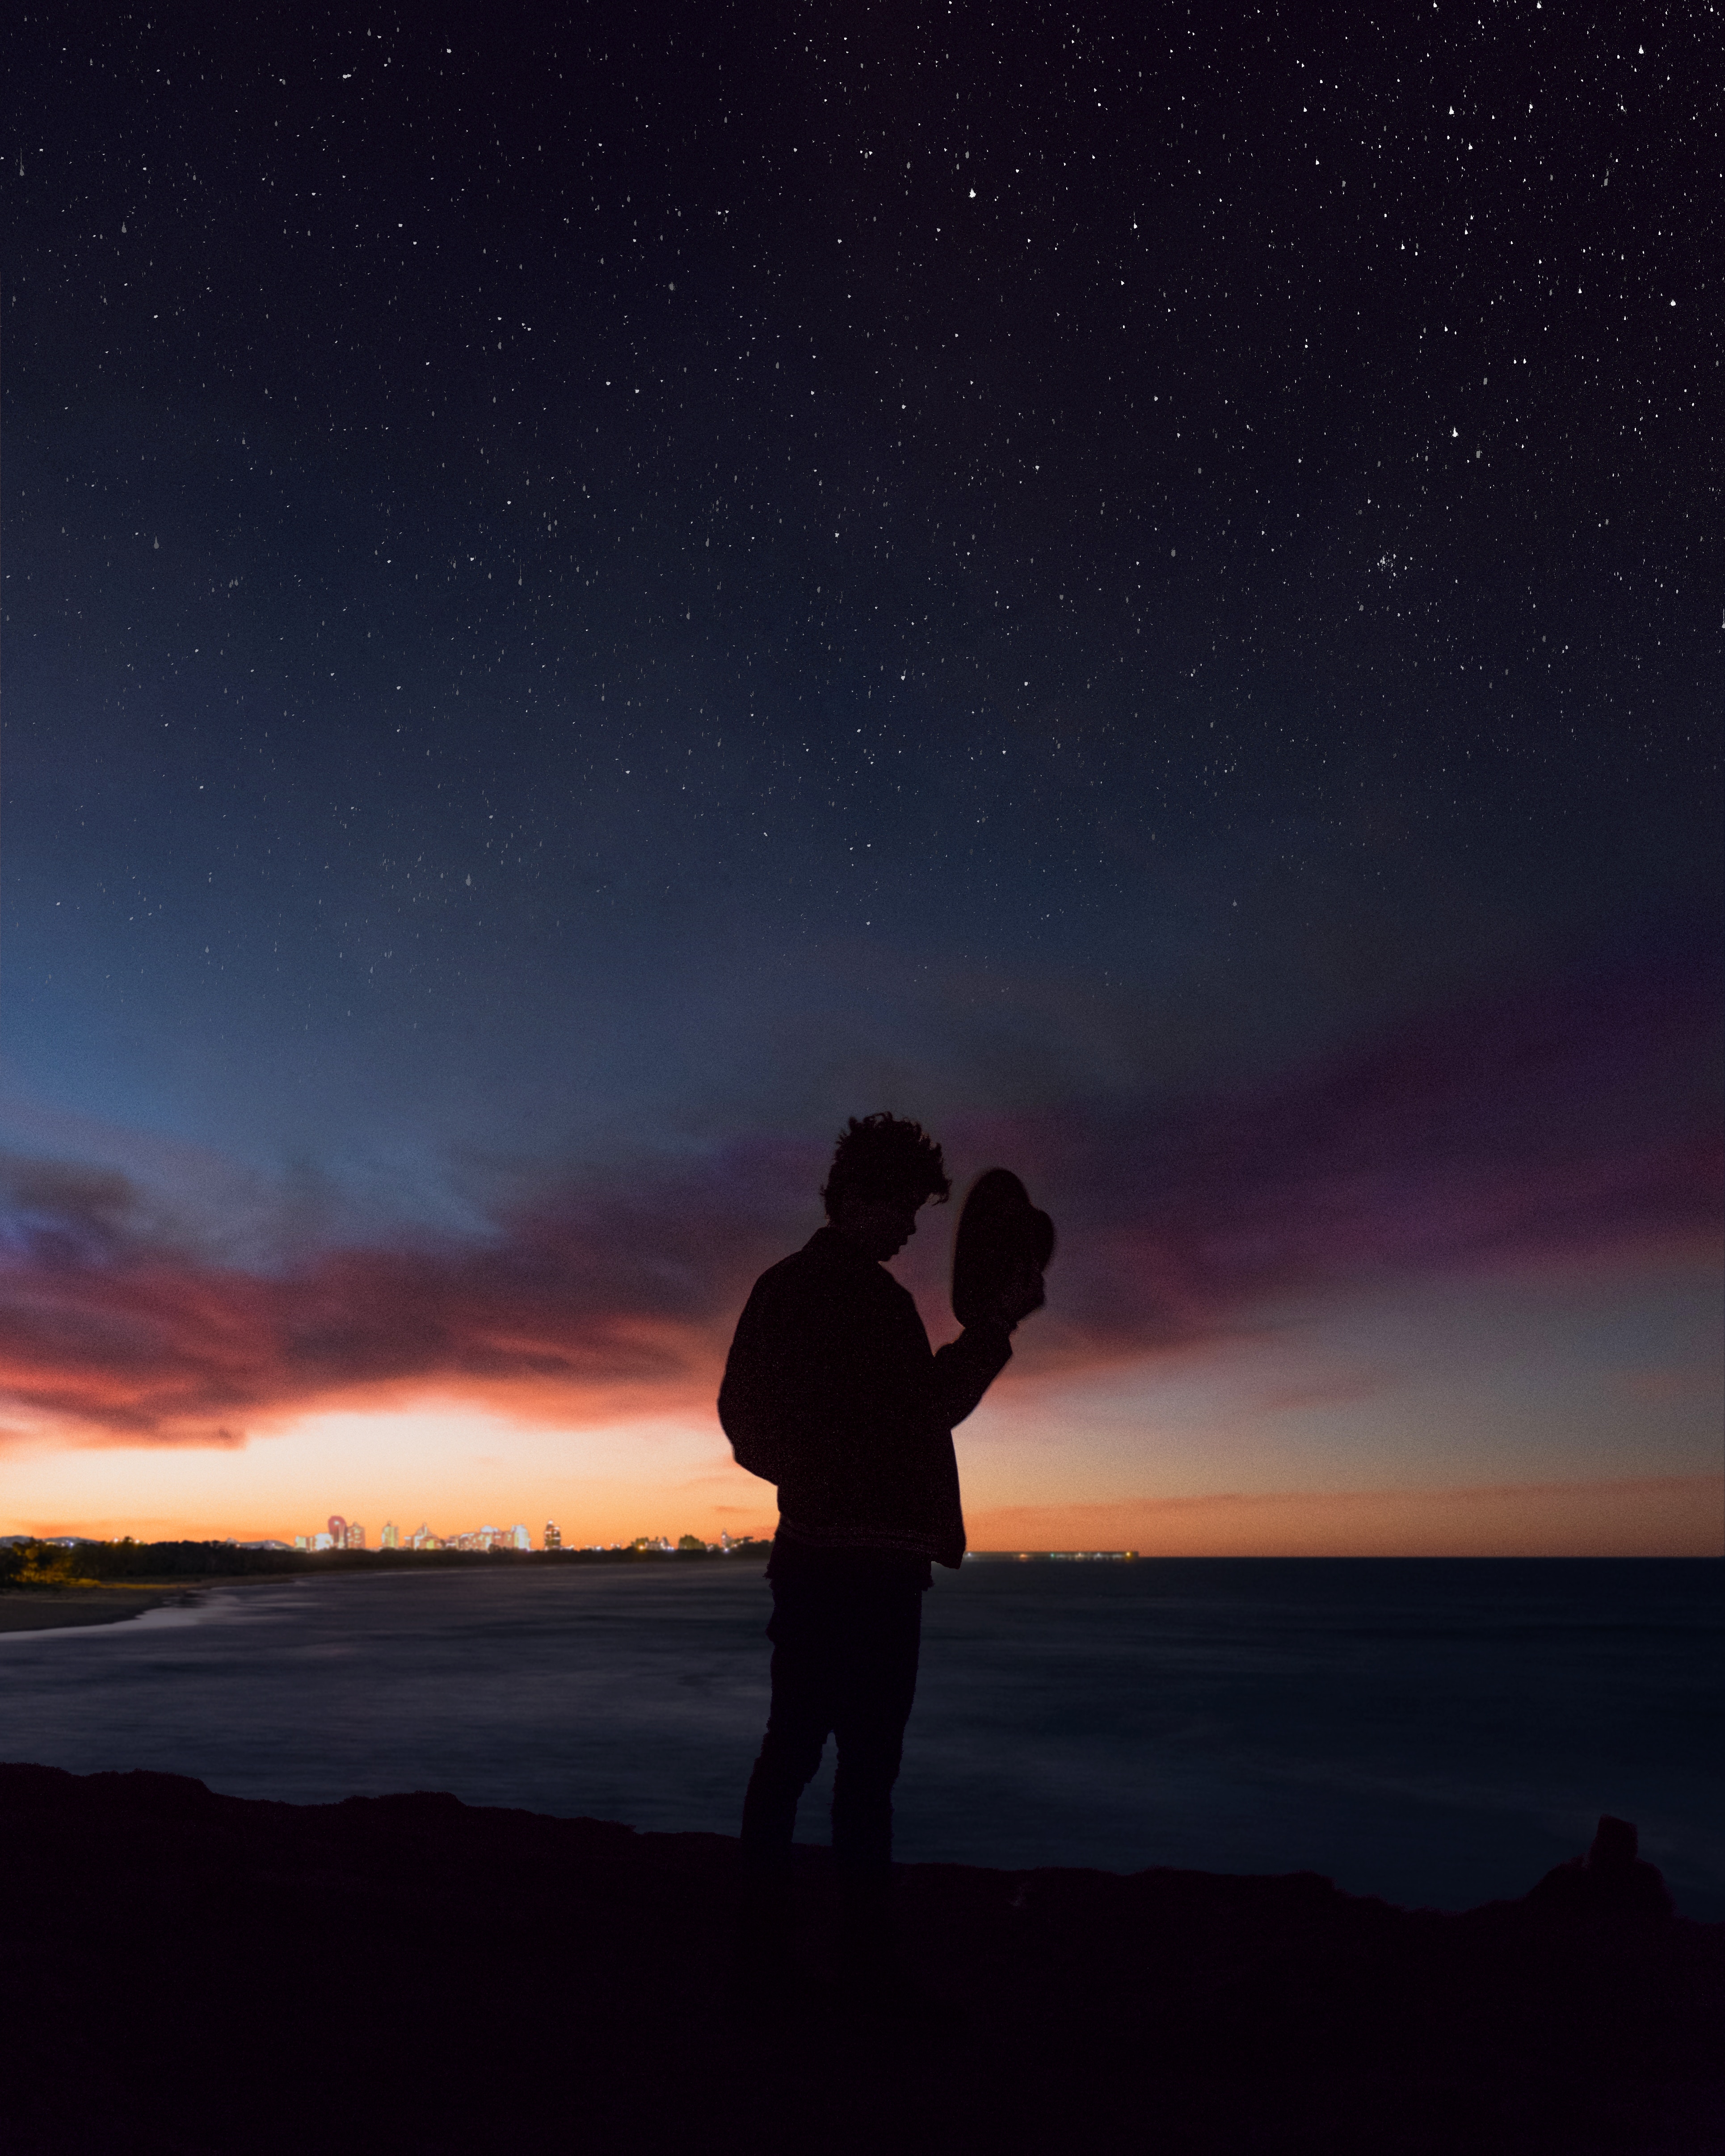 dark, loneliness, horizon, silhouette, privacy, seclusion, starry sky, hat wallpapers for tablet